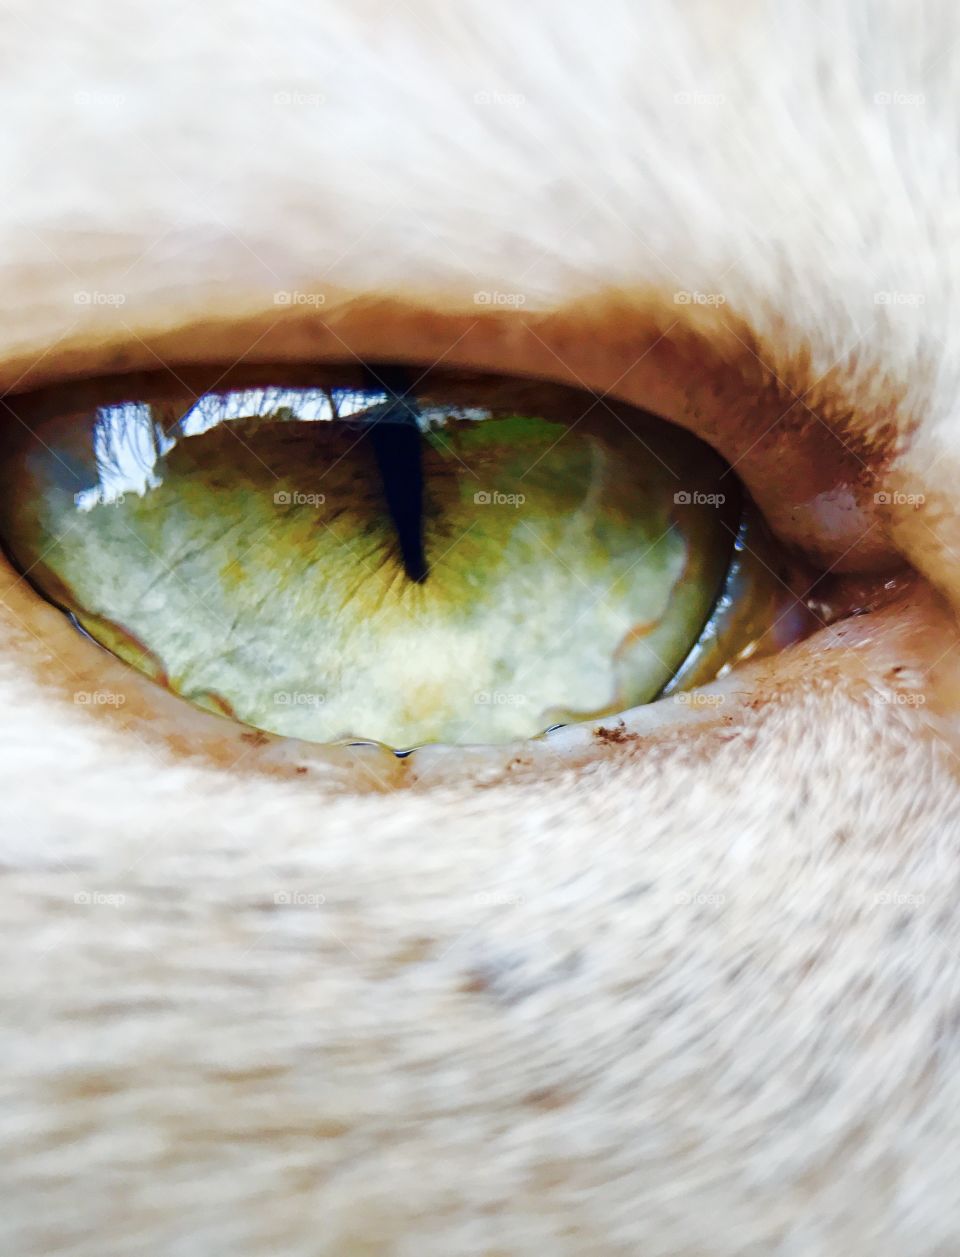 Inside the Feline Eye ... when it's up close you can see how amazing a cats eye is. All the colors of the spectrum but especially GREEN. A cats eye is as beautiful as the cat. As colorful as their personality and soul. You can even see the reflections of nature in the top left hand corner. It was nice of my cat to let me get so close to take this picture anyway. 
He is a sweet boy. 